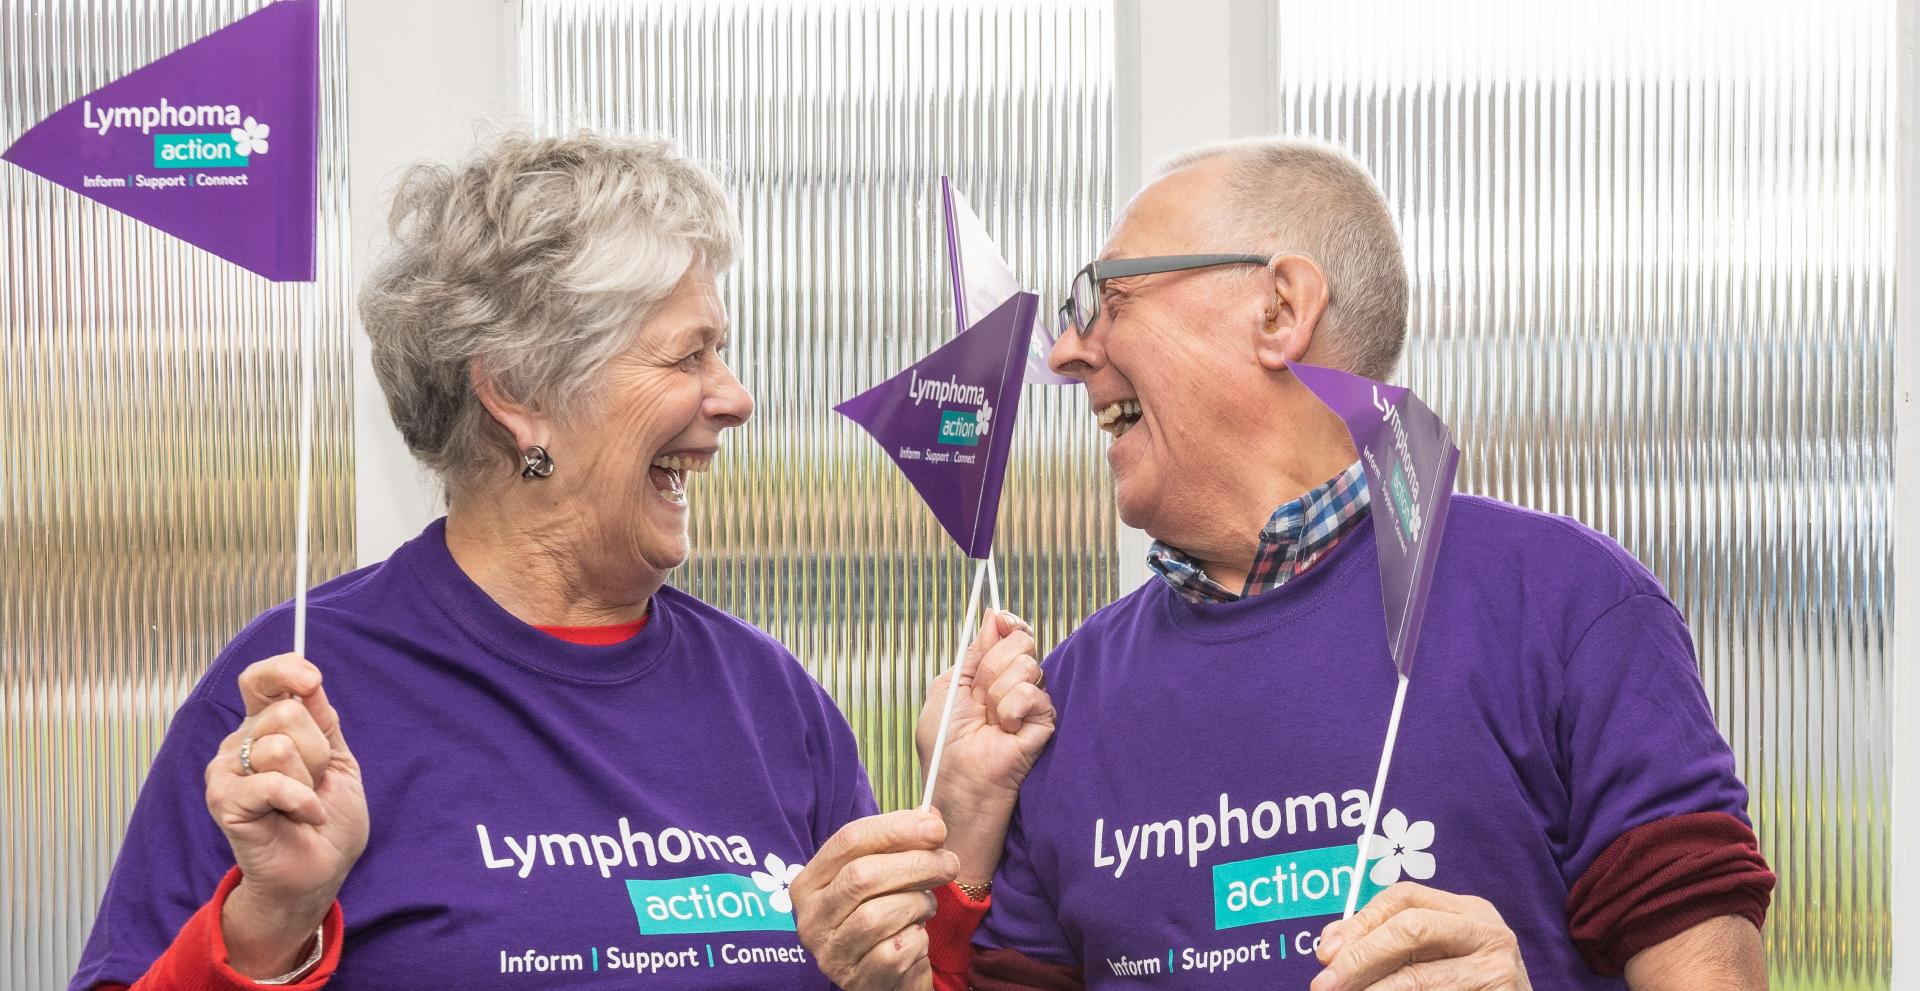 Female & male with Lymphoma Action flags